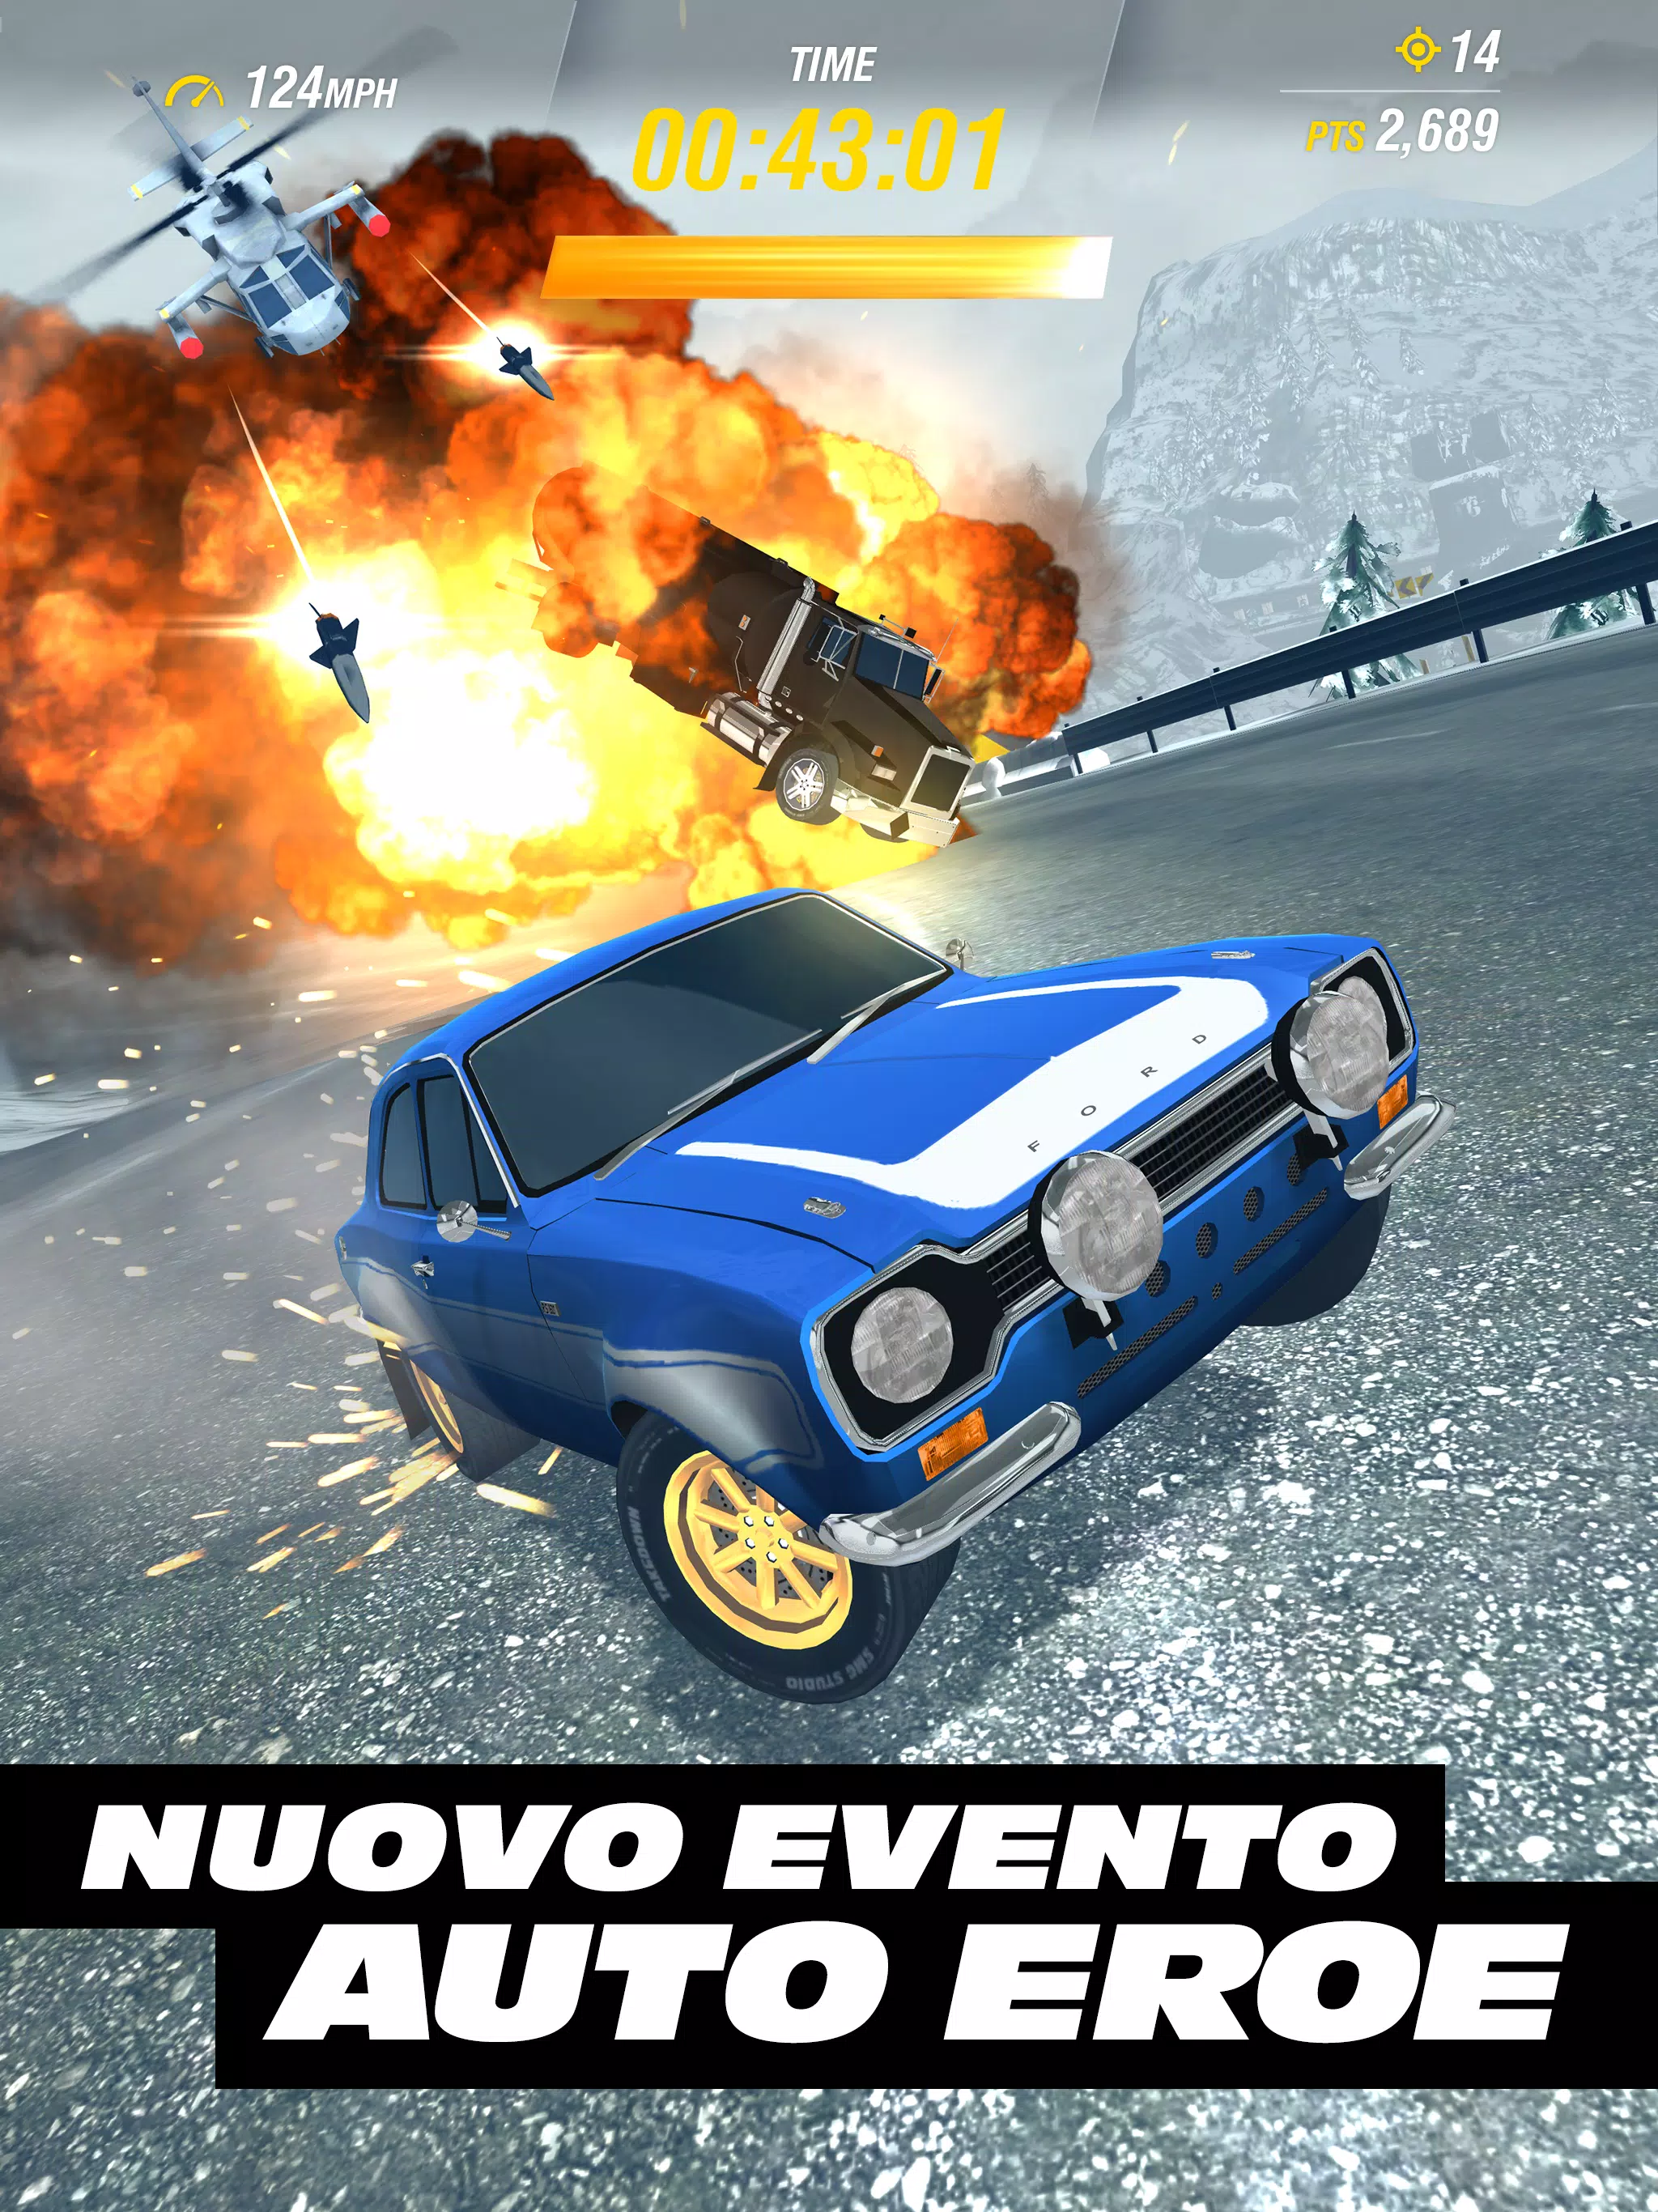 Fast & Furious for Android - APK Download